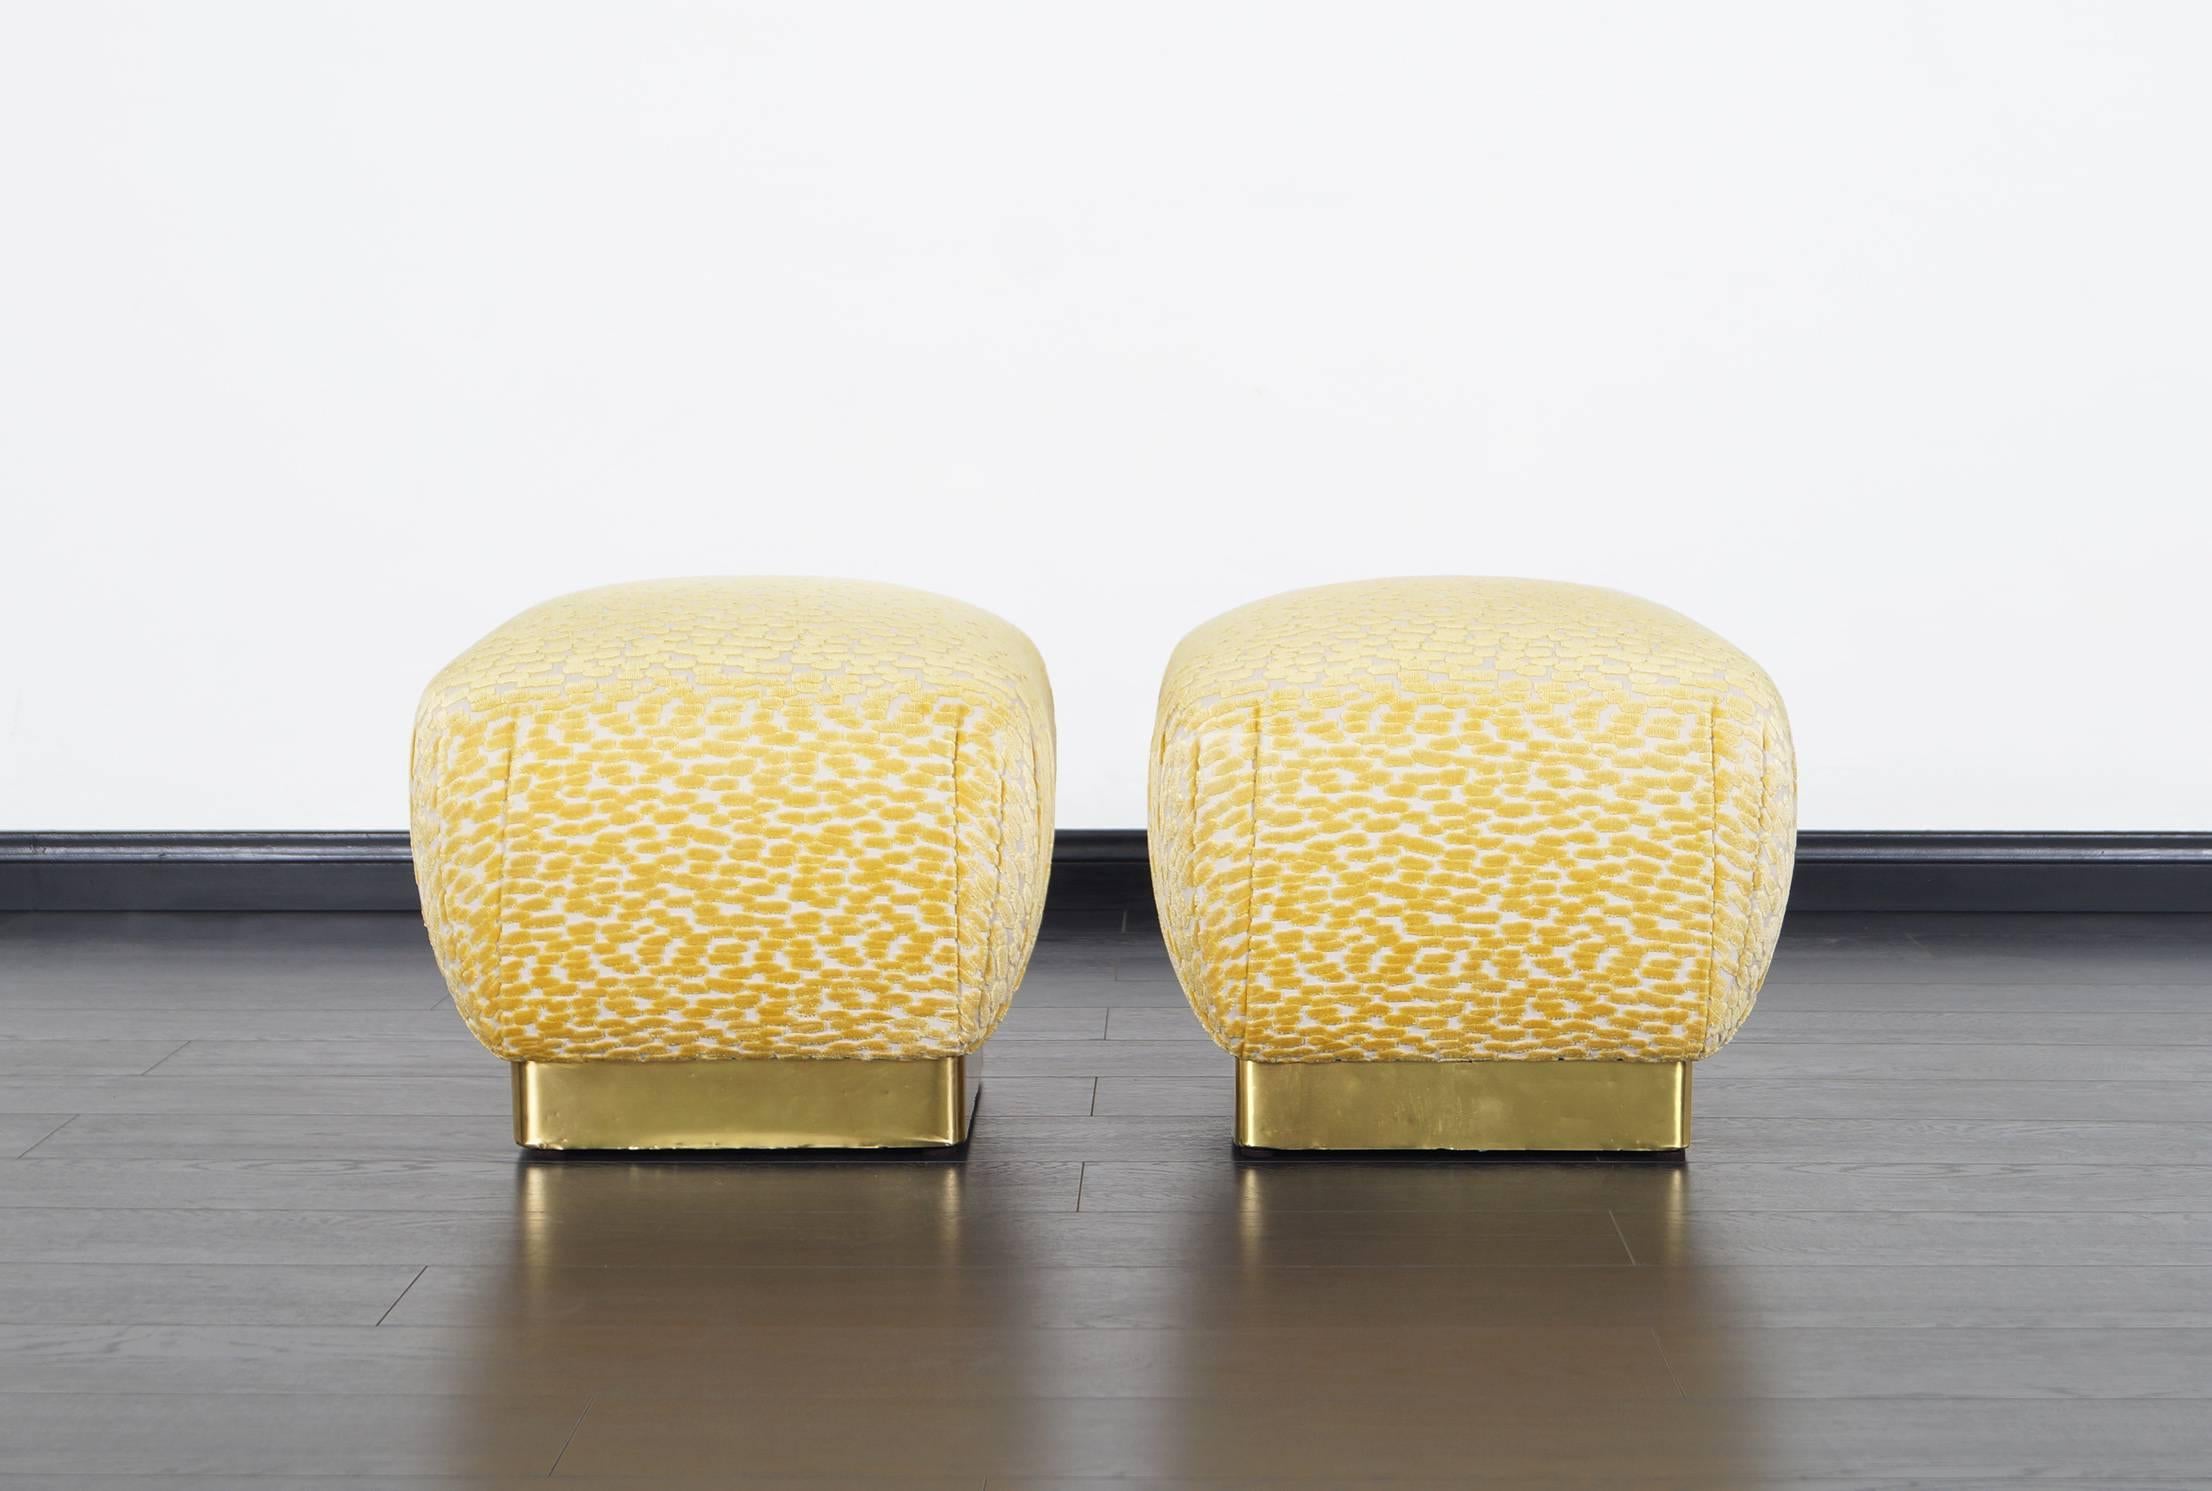 Stunning pair of vintage brass poufs / ottomans designed by Marge Carson. Newly reupholstered in custom velvet. The cushions pops up like a souffle. A great set for extra seating.